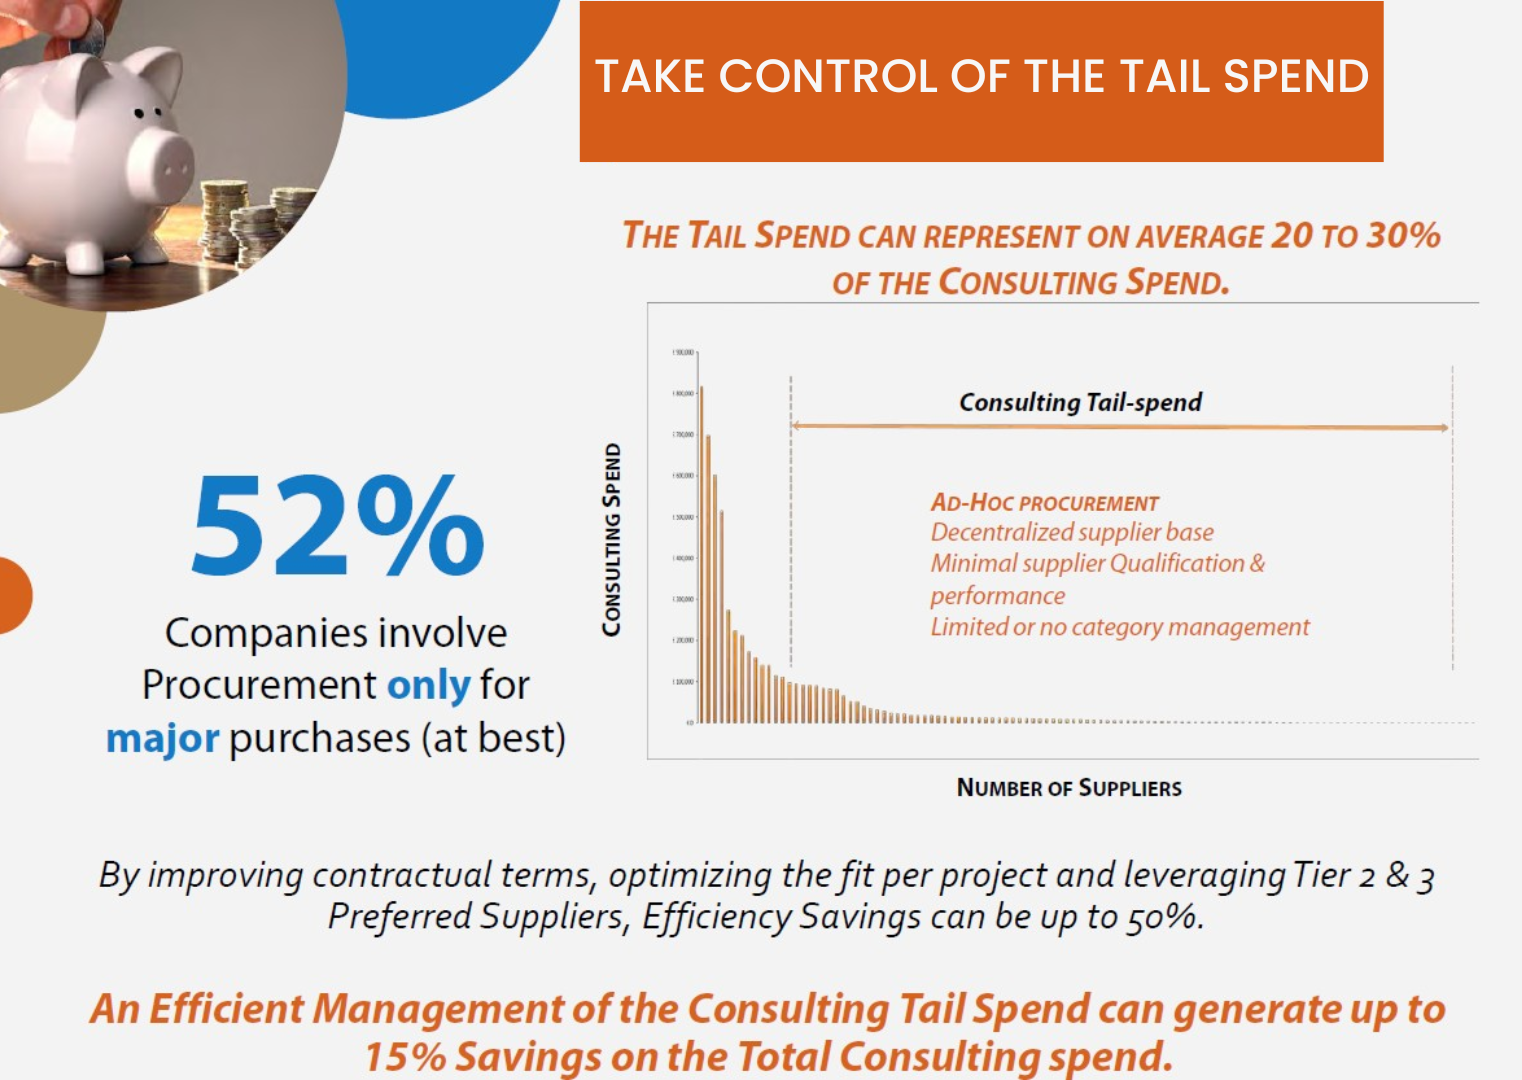 Take Control of the Tail Spend